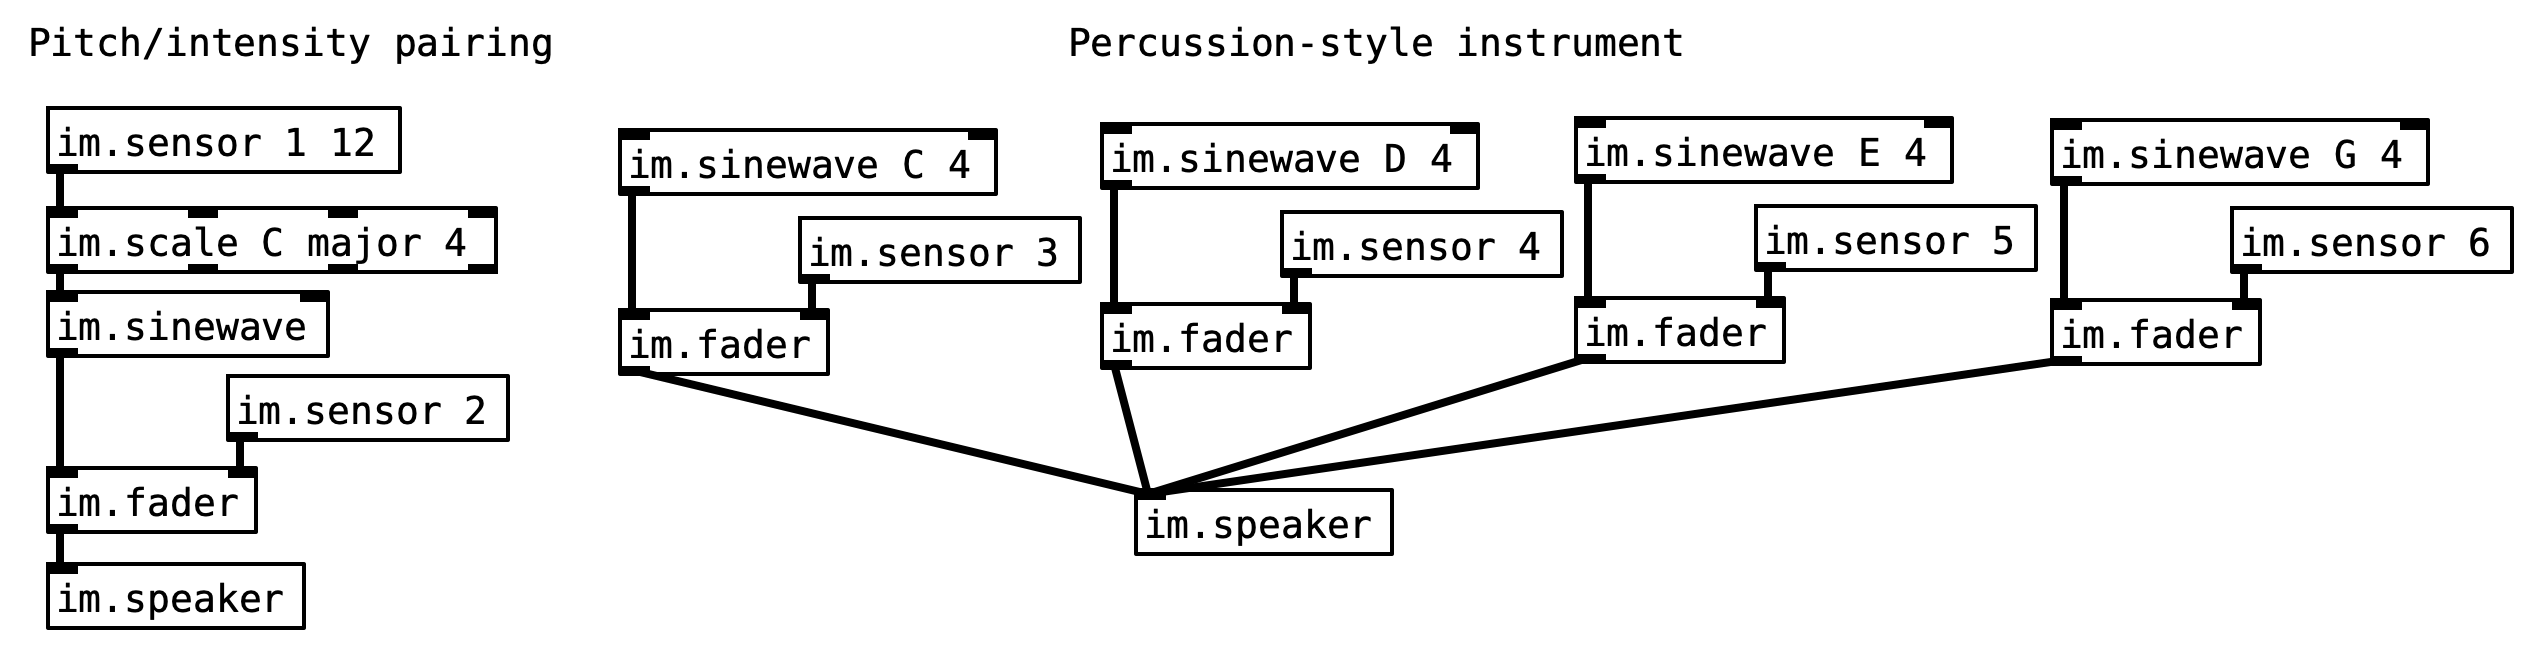 example-pitch-intensity-percussion